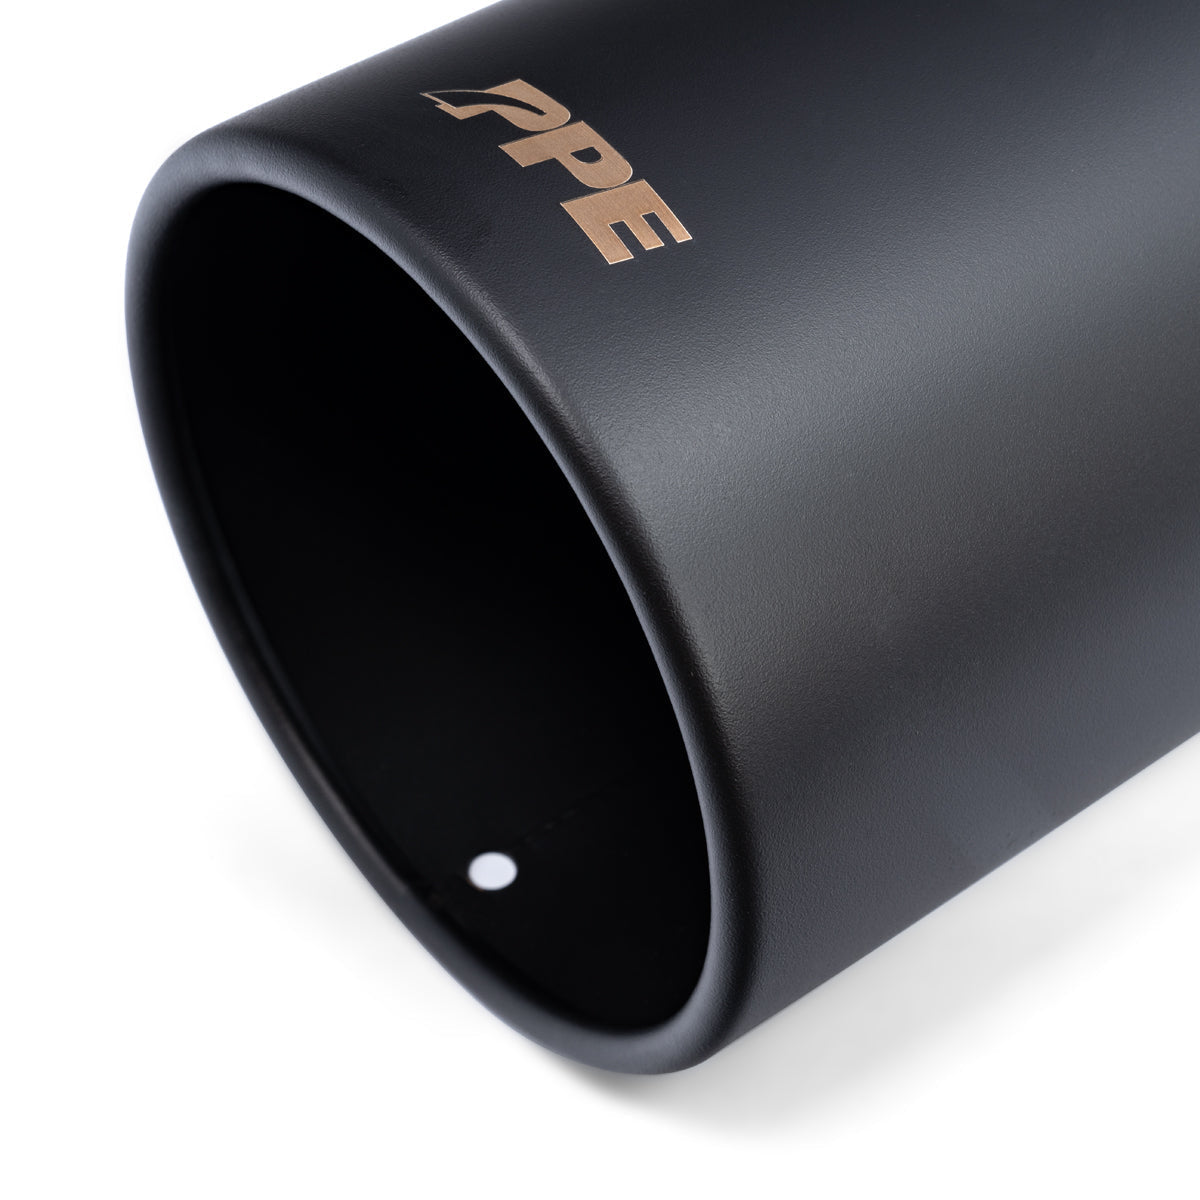 4" Exhaust Tip, 304 Stainless Steel (Polished/Black)